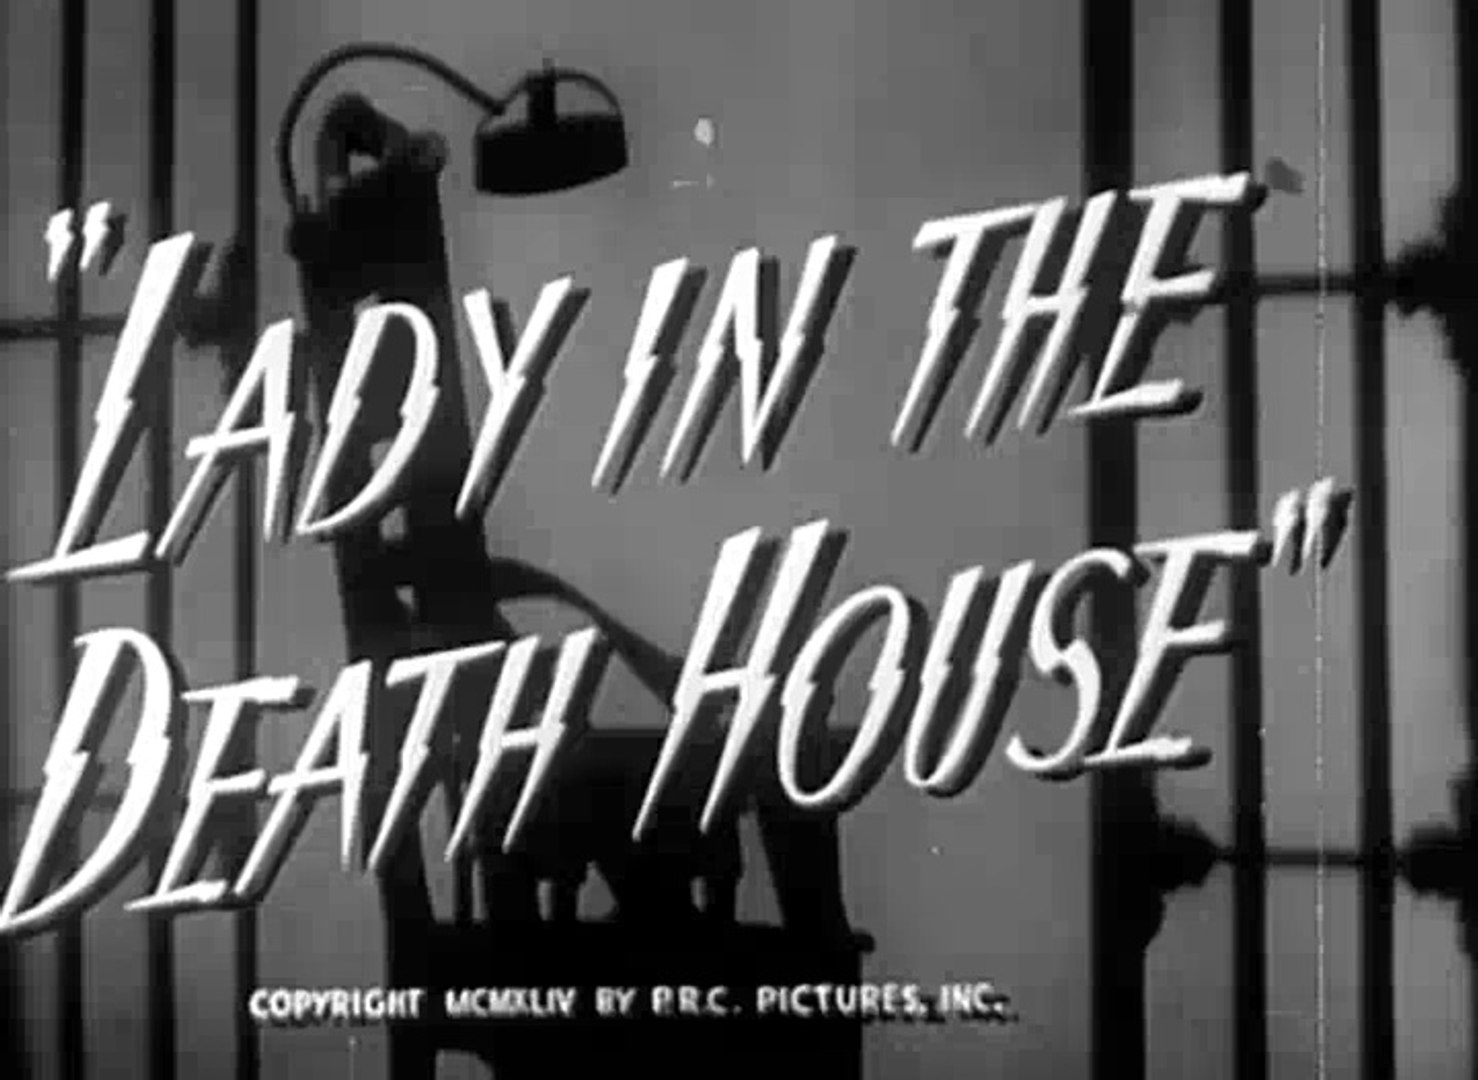 Lady in the Death House (1944) Crime Drama Movie